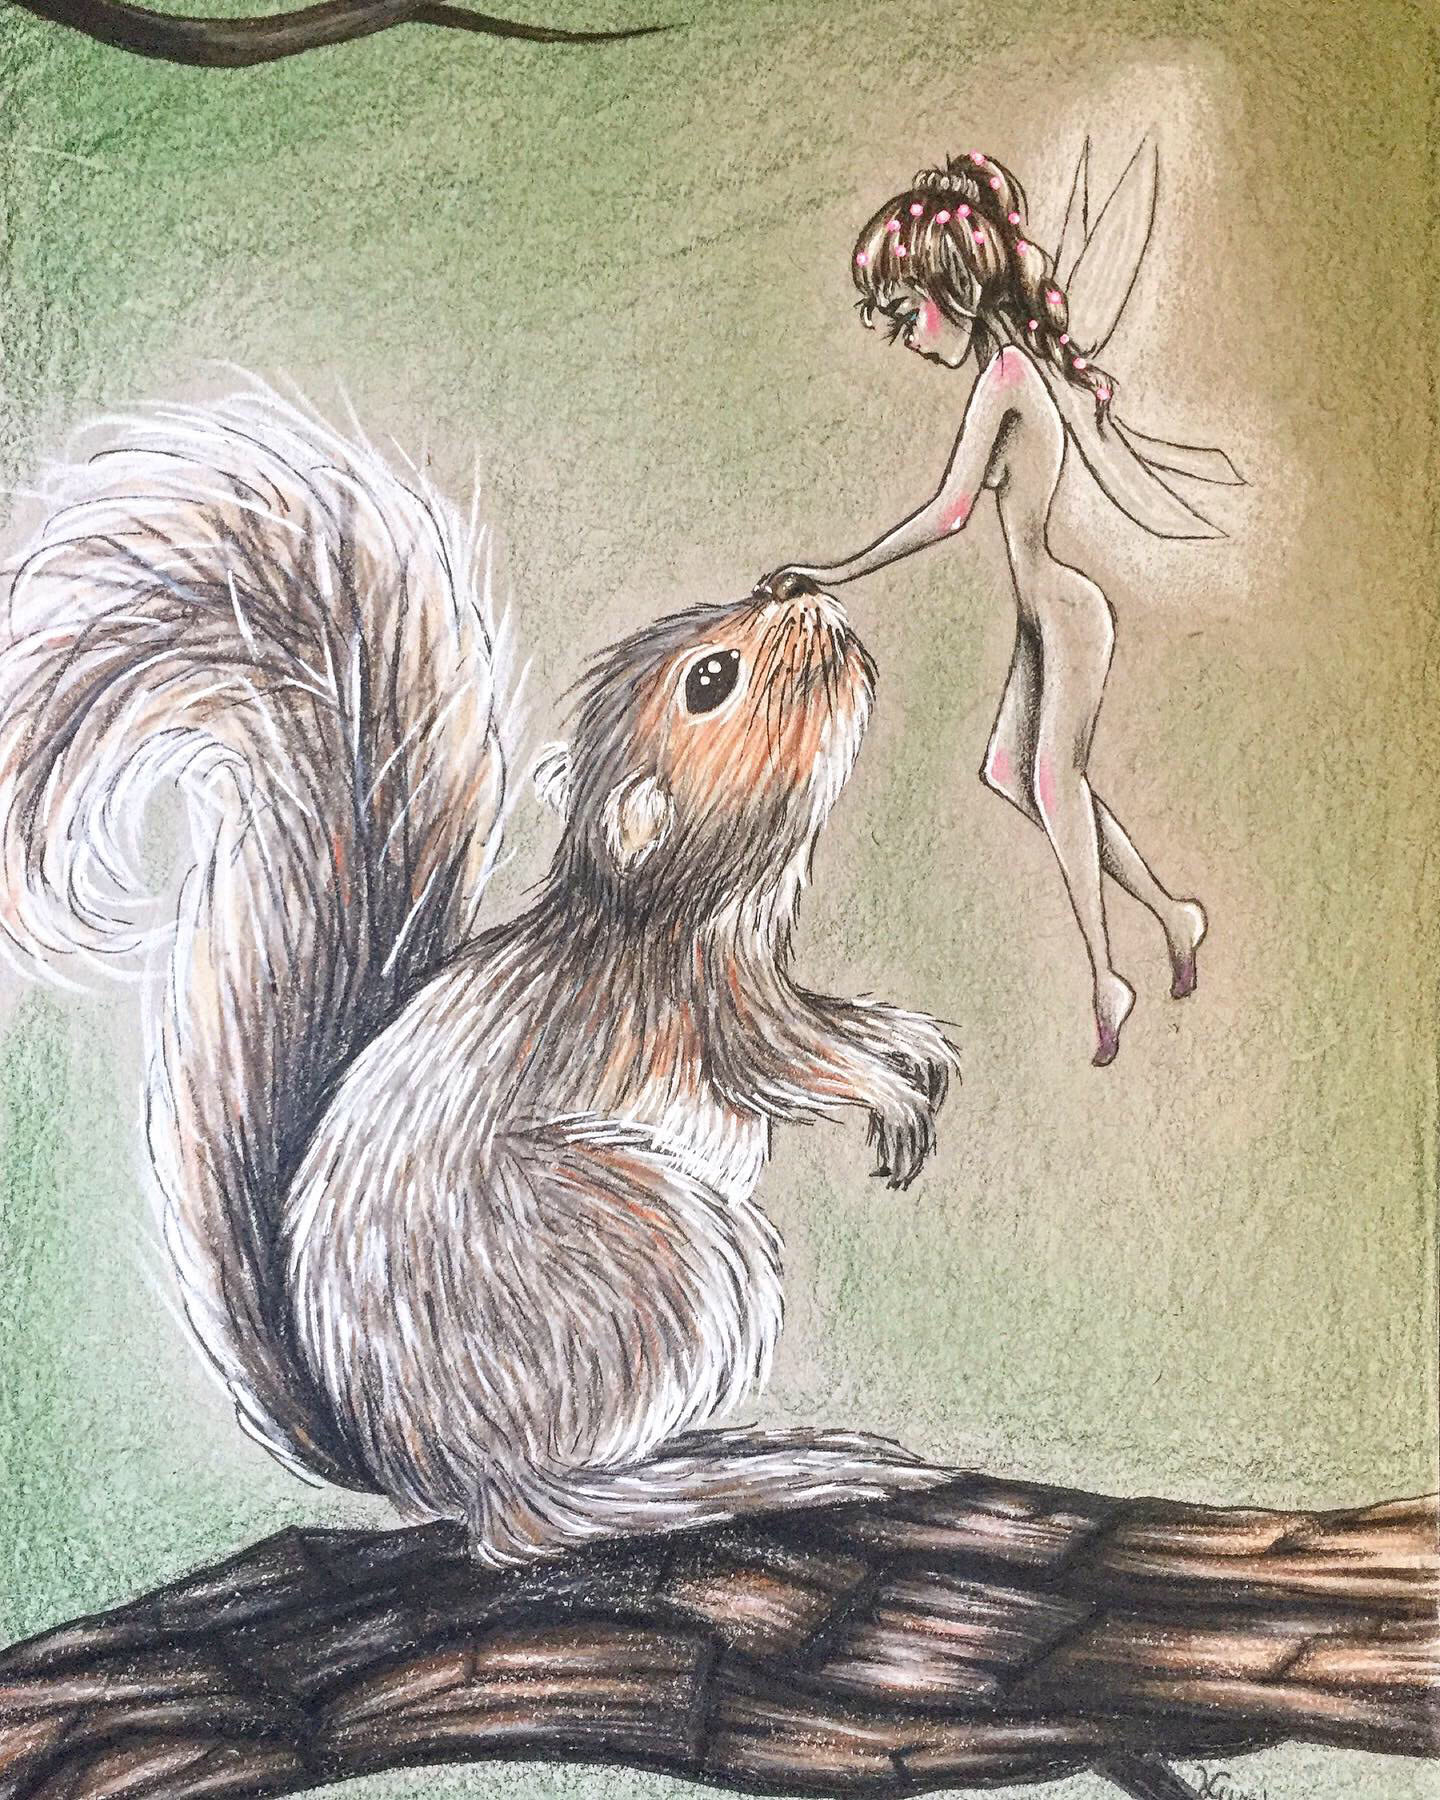 A drawing of a furry brown squirrel with a fluffy tail, standing on his hind legs on a branch. The squirrel is looking up at a nude fairy with wings and pale skin. The fairy is petting the nose of the squirrel.